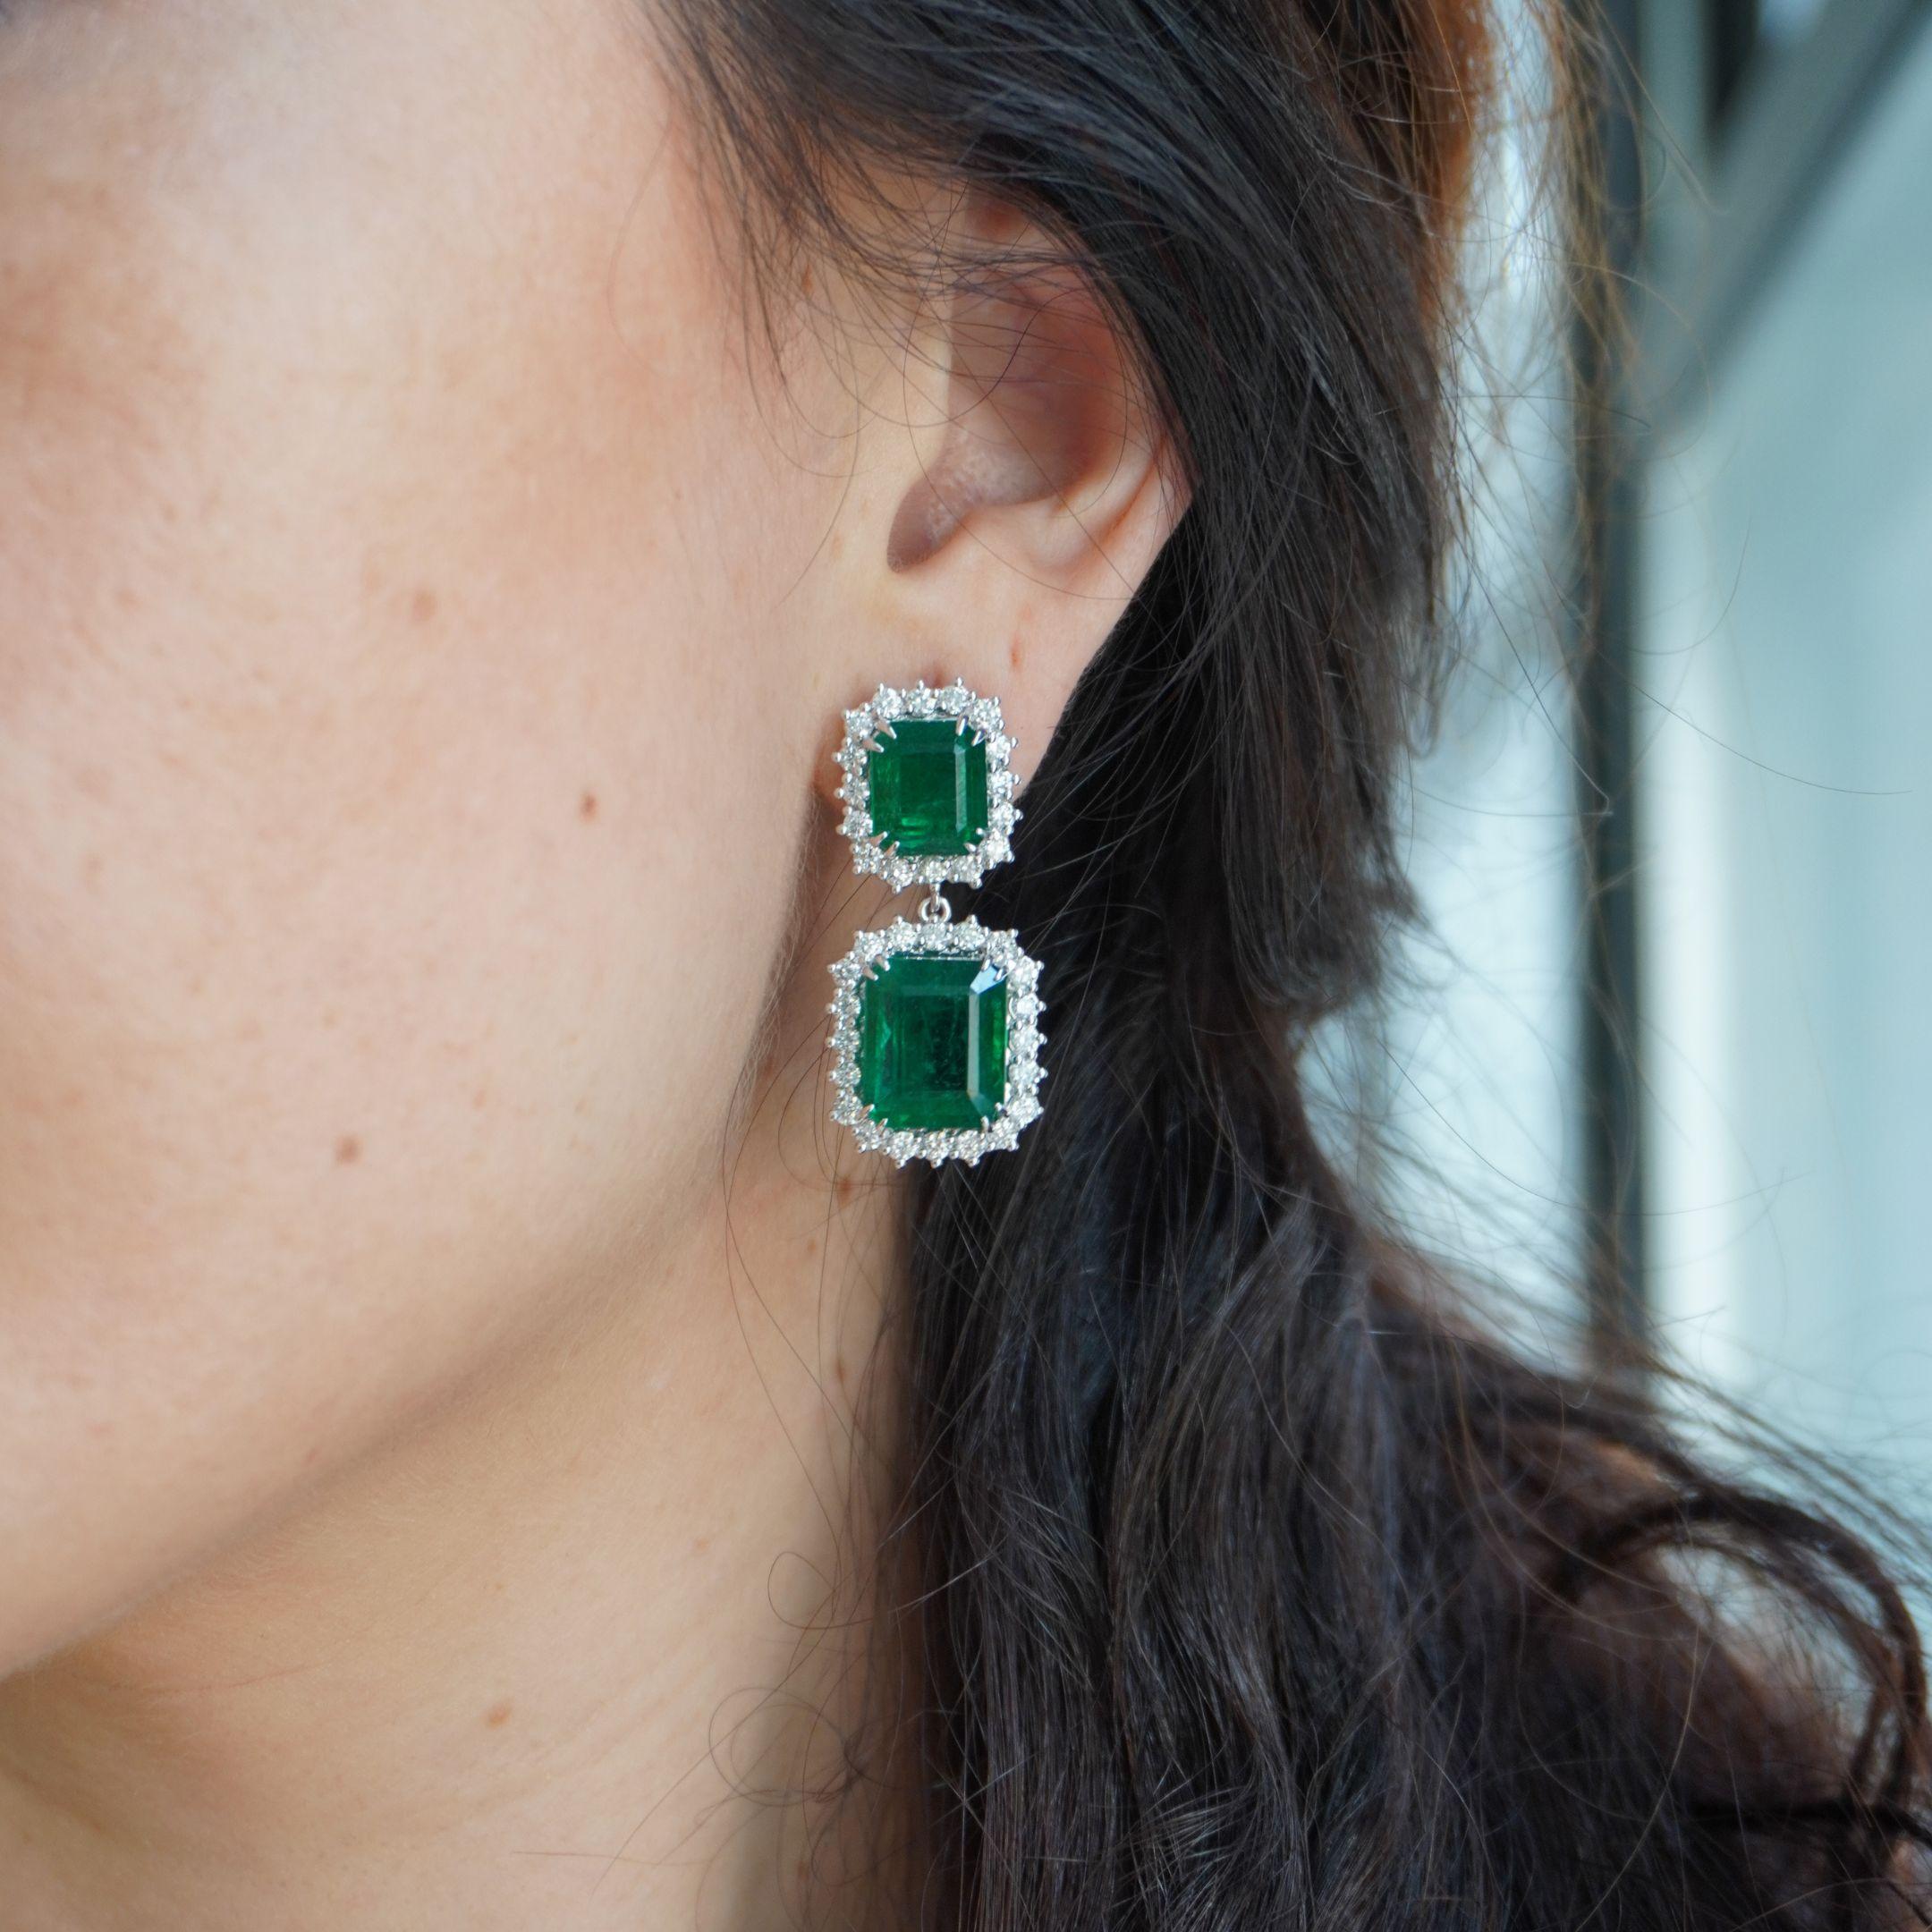 20 Carat Emerald Dangle Earrings With 2.5 Carat Halo Diamonds 18K White Gold For Sale 1